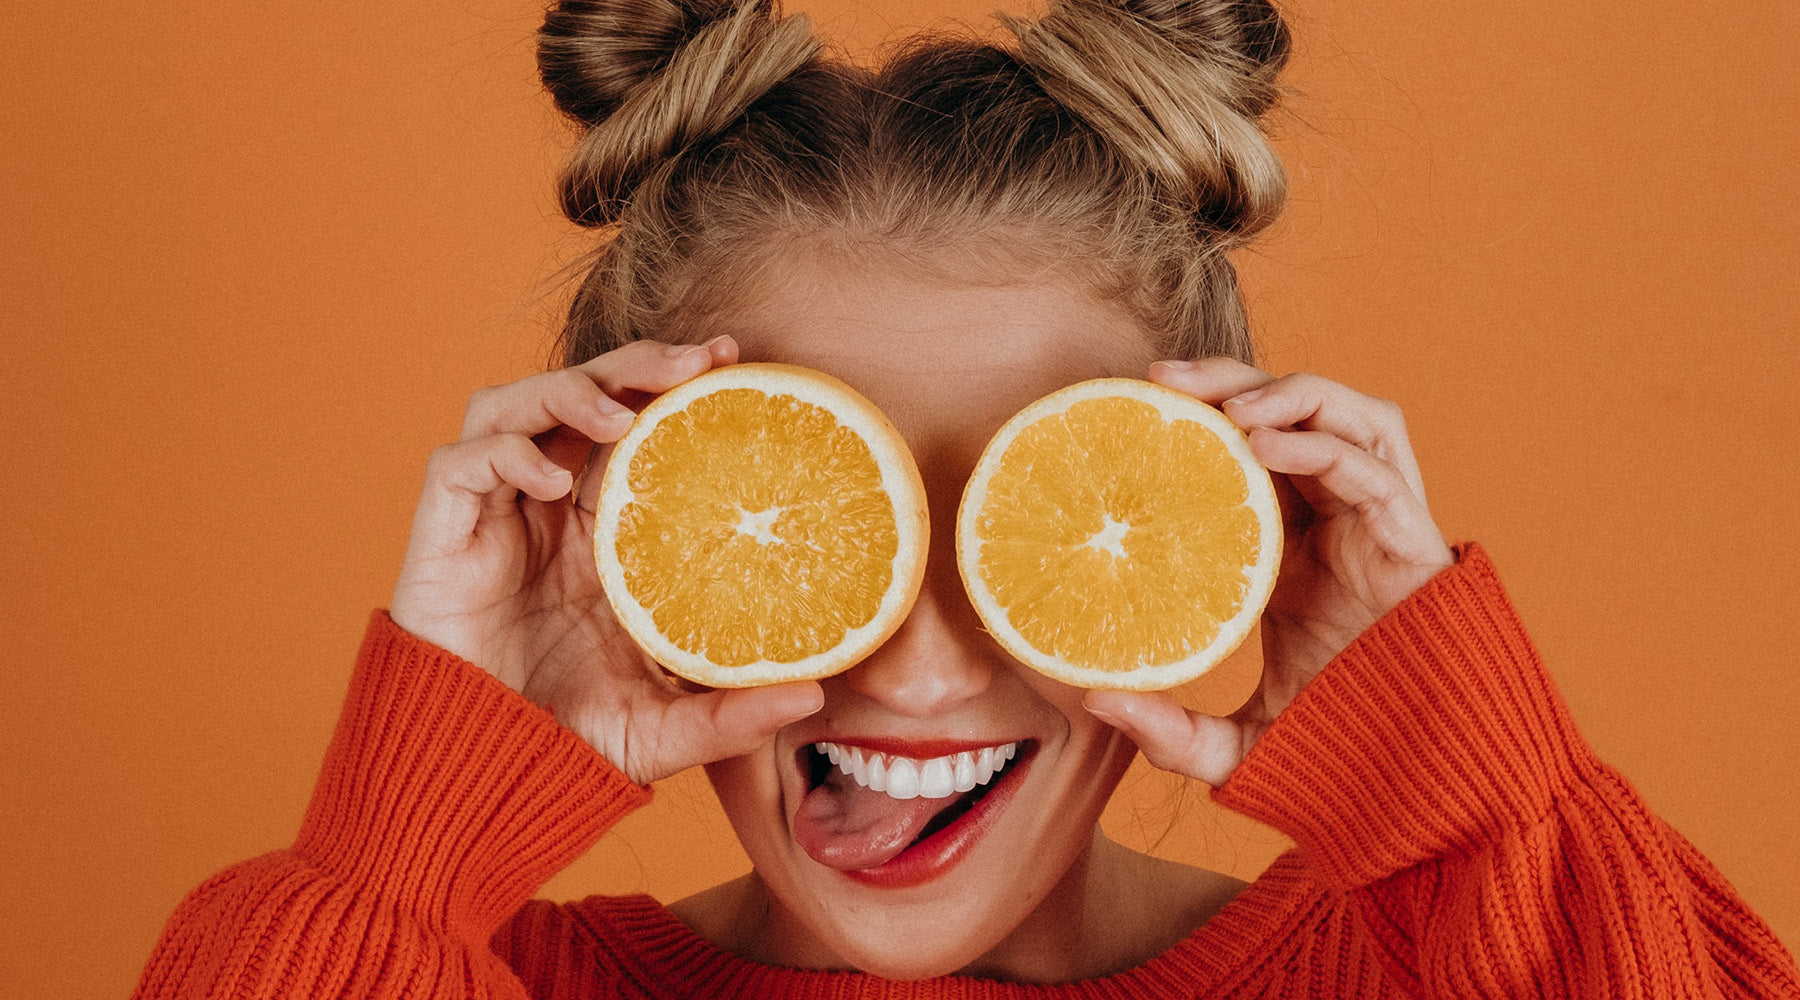 Model with Oranges Beauty Vitamin C for Skin